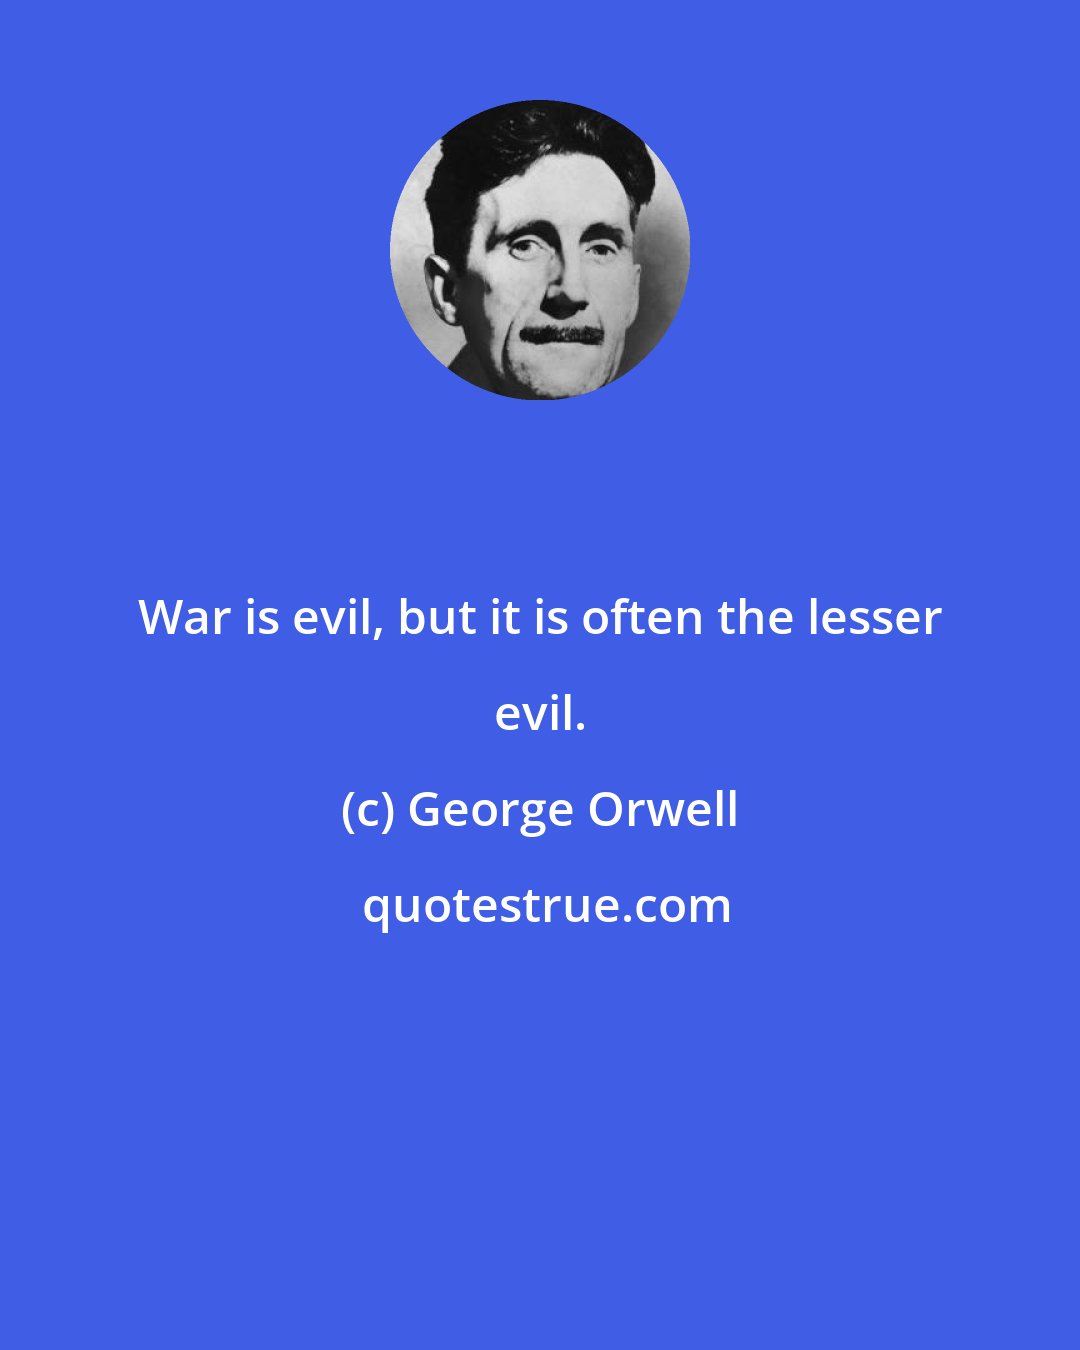 George Orwell: War is evil, but it is often the lesser evil.